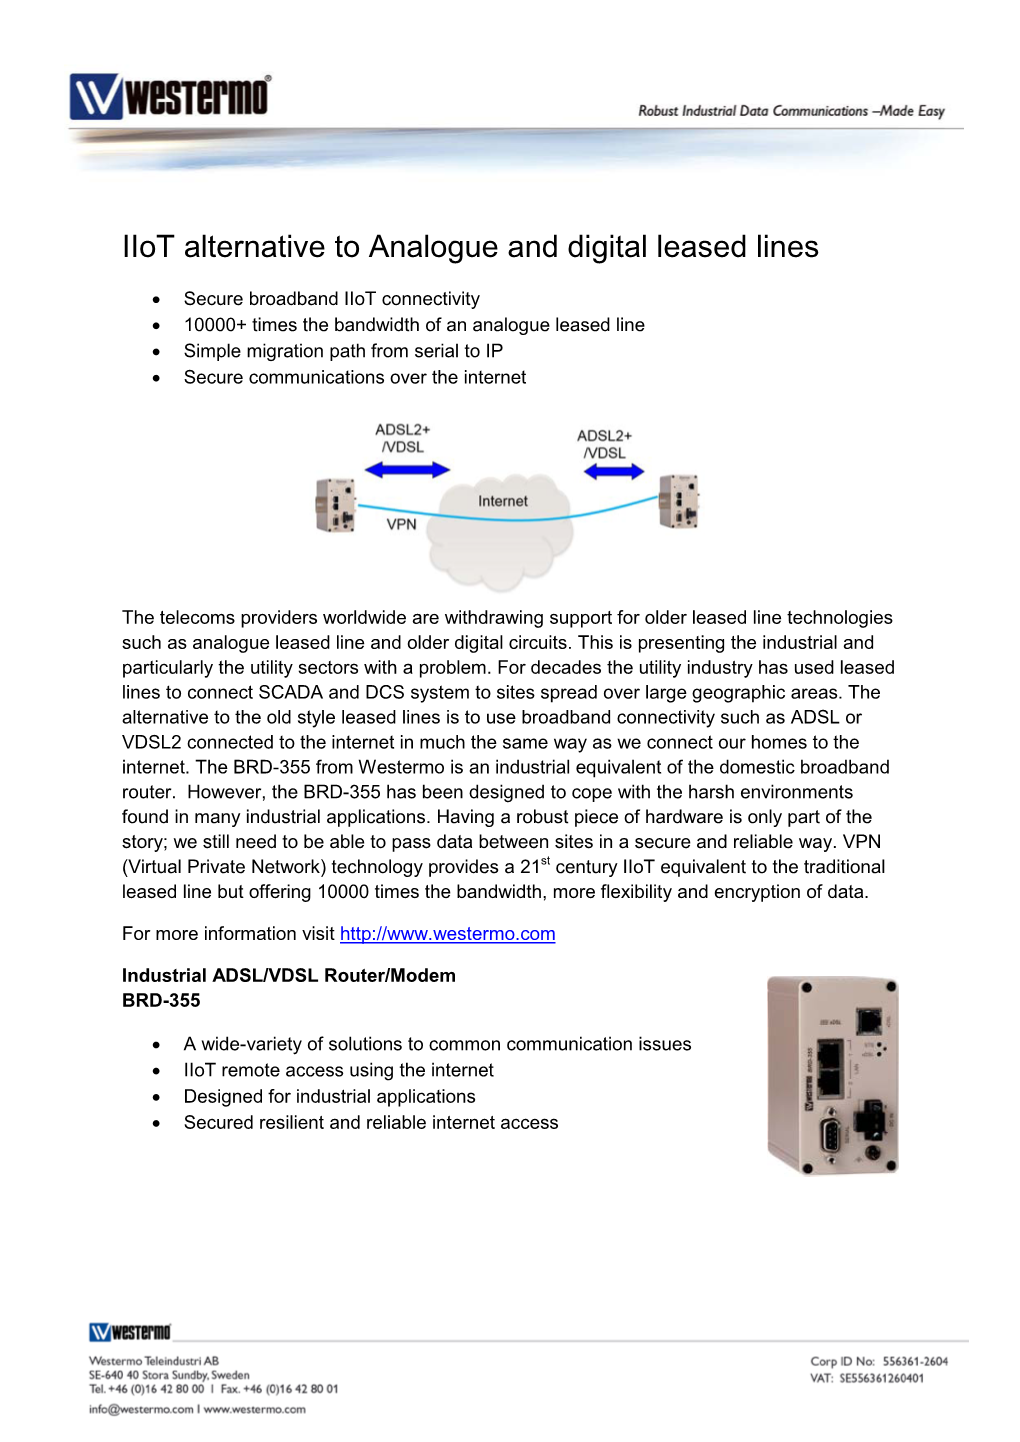 Iiot Alternative to Analogue and Digital Leased Lines